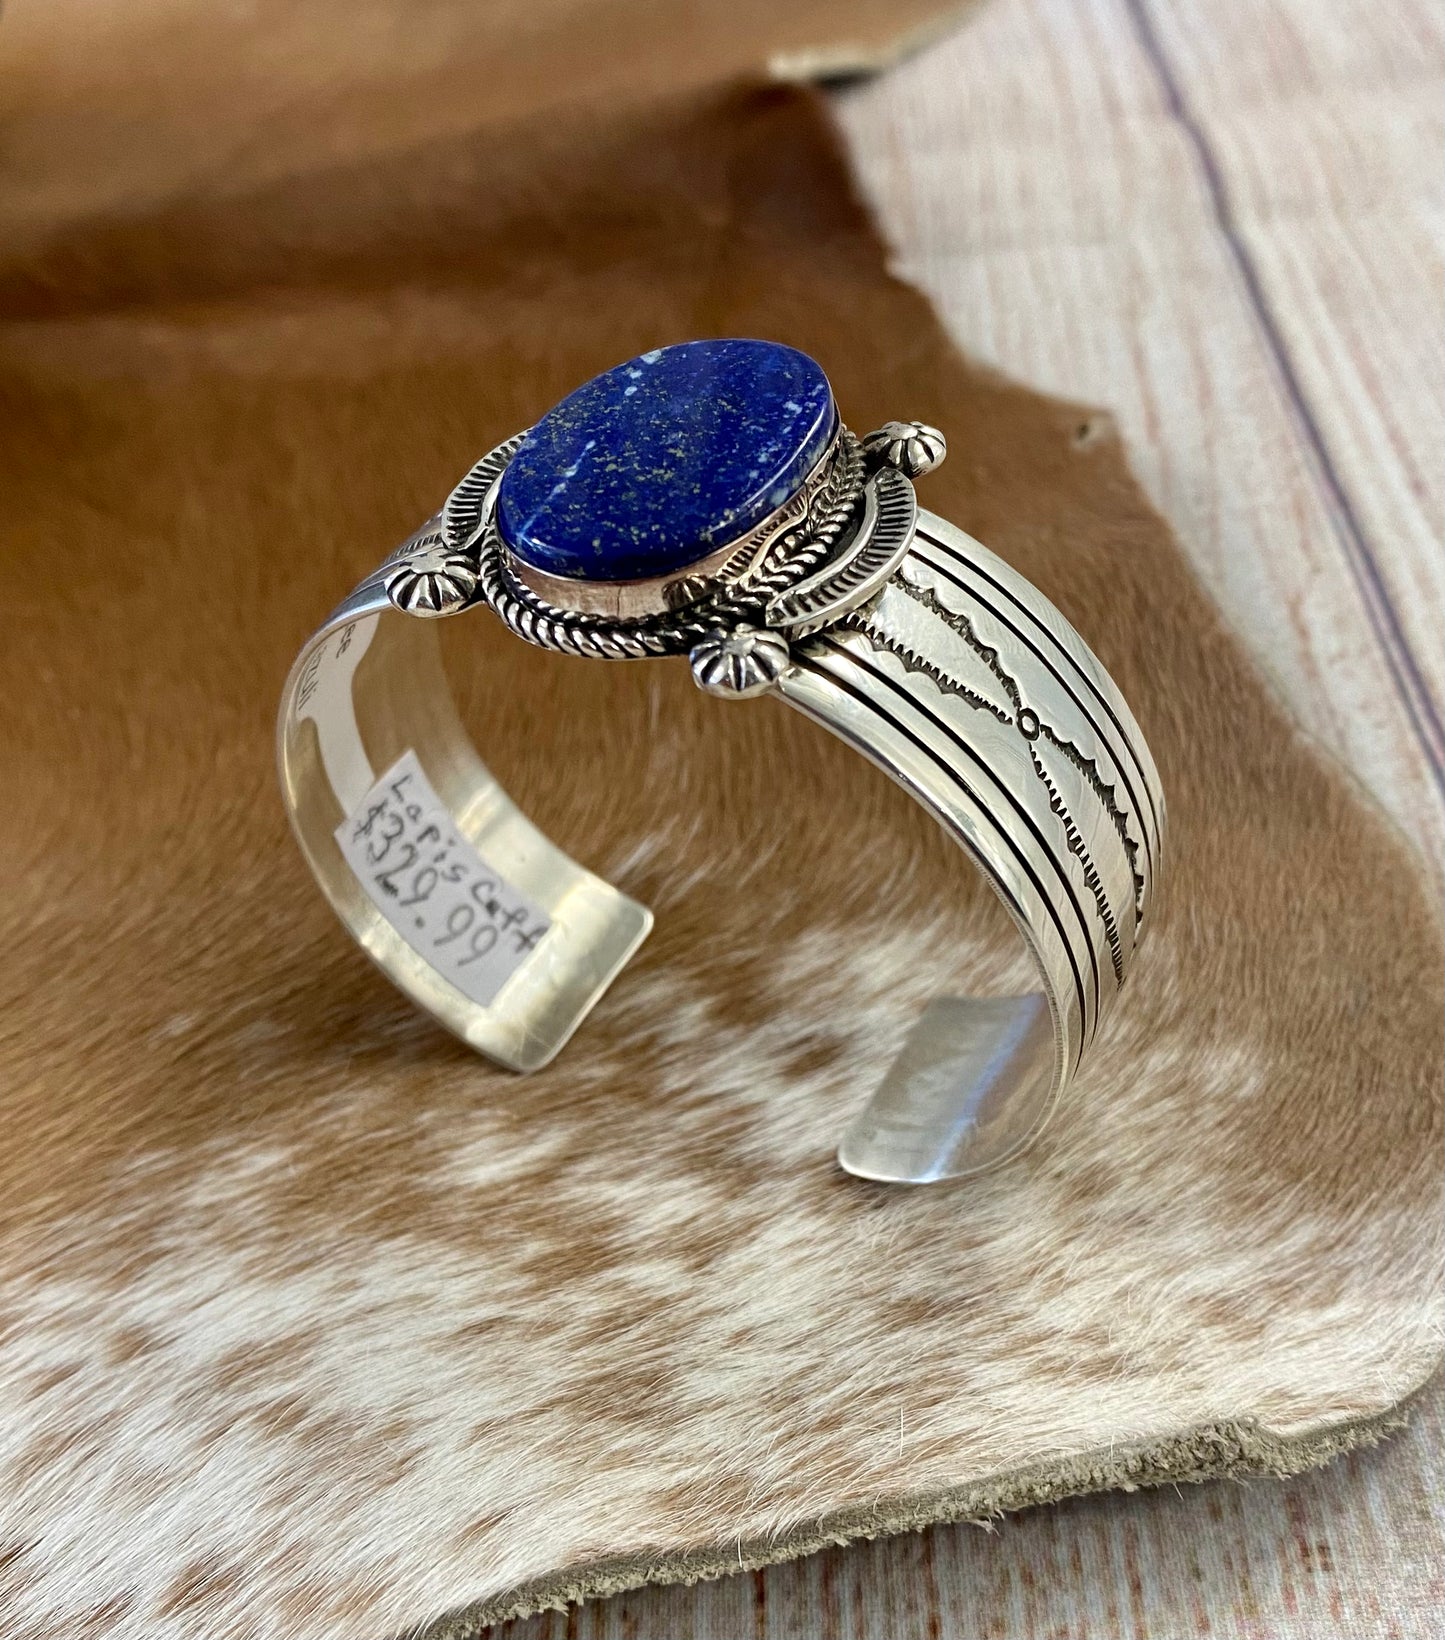 An absolutely stunning large single blue lapis stone with stamped silver detailing down the sides sterling silver cuff bracelet. This is a amazing statement piece that you are sure to receive compliments on! A piece that can be cherished and passed down generations for your children and grandchildren to admire for decades as well as lifetimes to come. Made by the talented Native American artist and silversmith Irene Kee. This beauty is stamped STERLING and signed "I. KEE" inside of the cuff bracelet. 